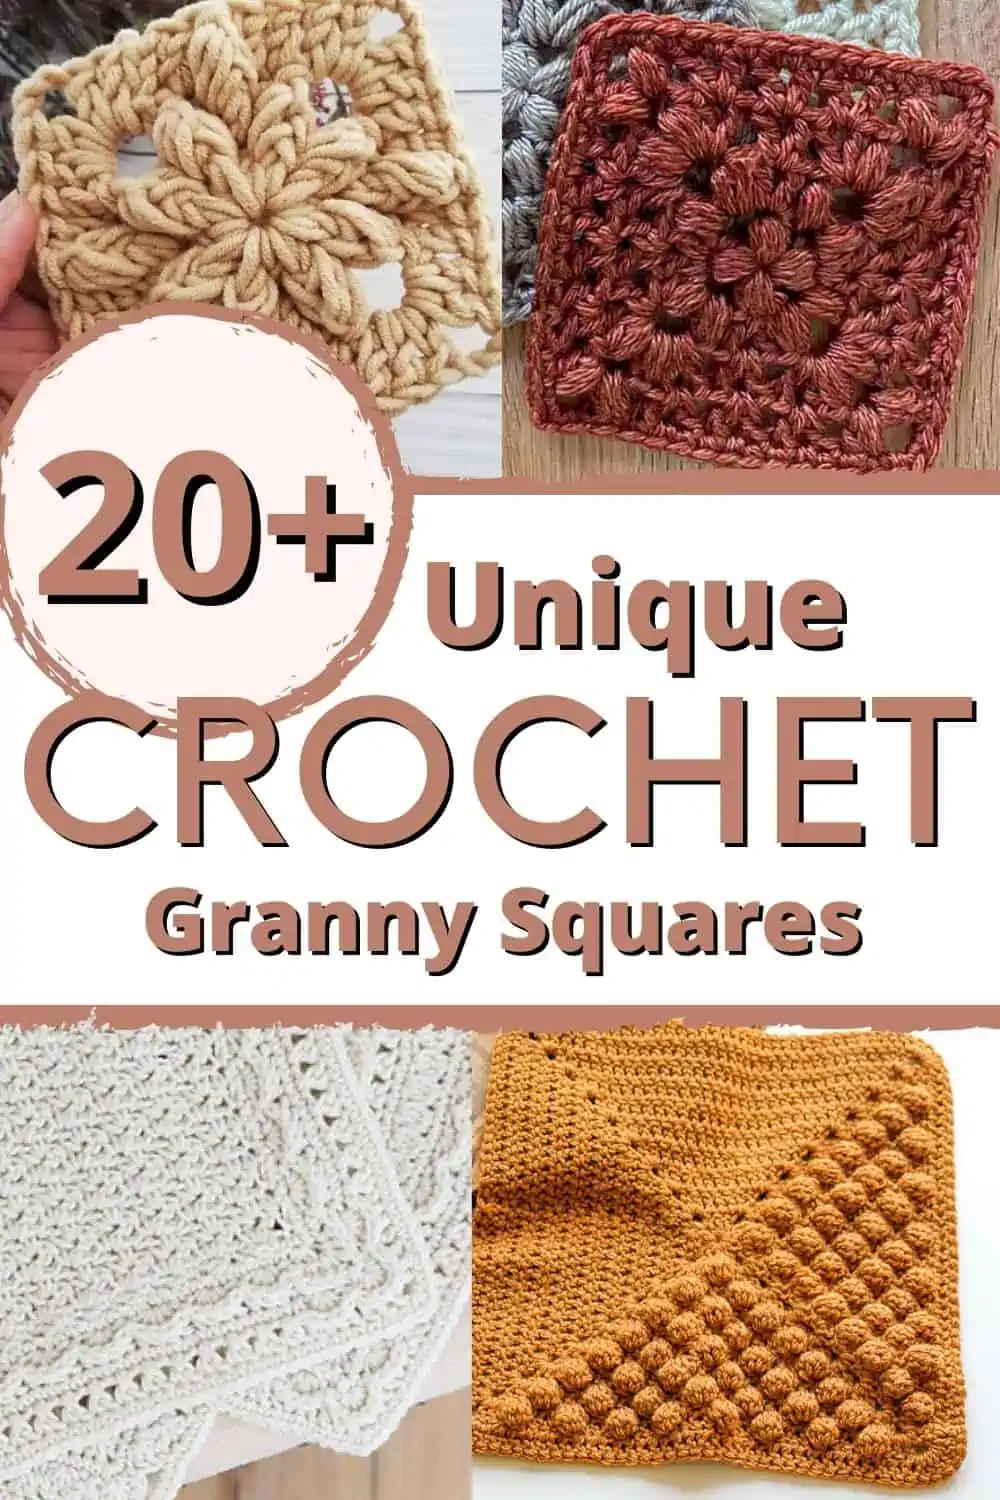 graphic reading "20+ unique crochet granny squares" with images of different granny squares